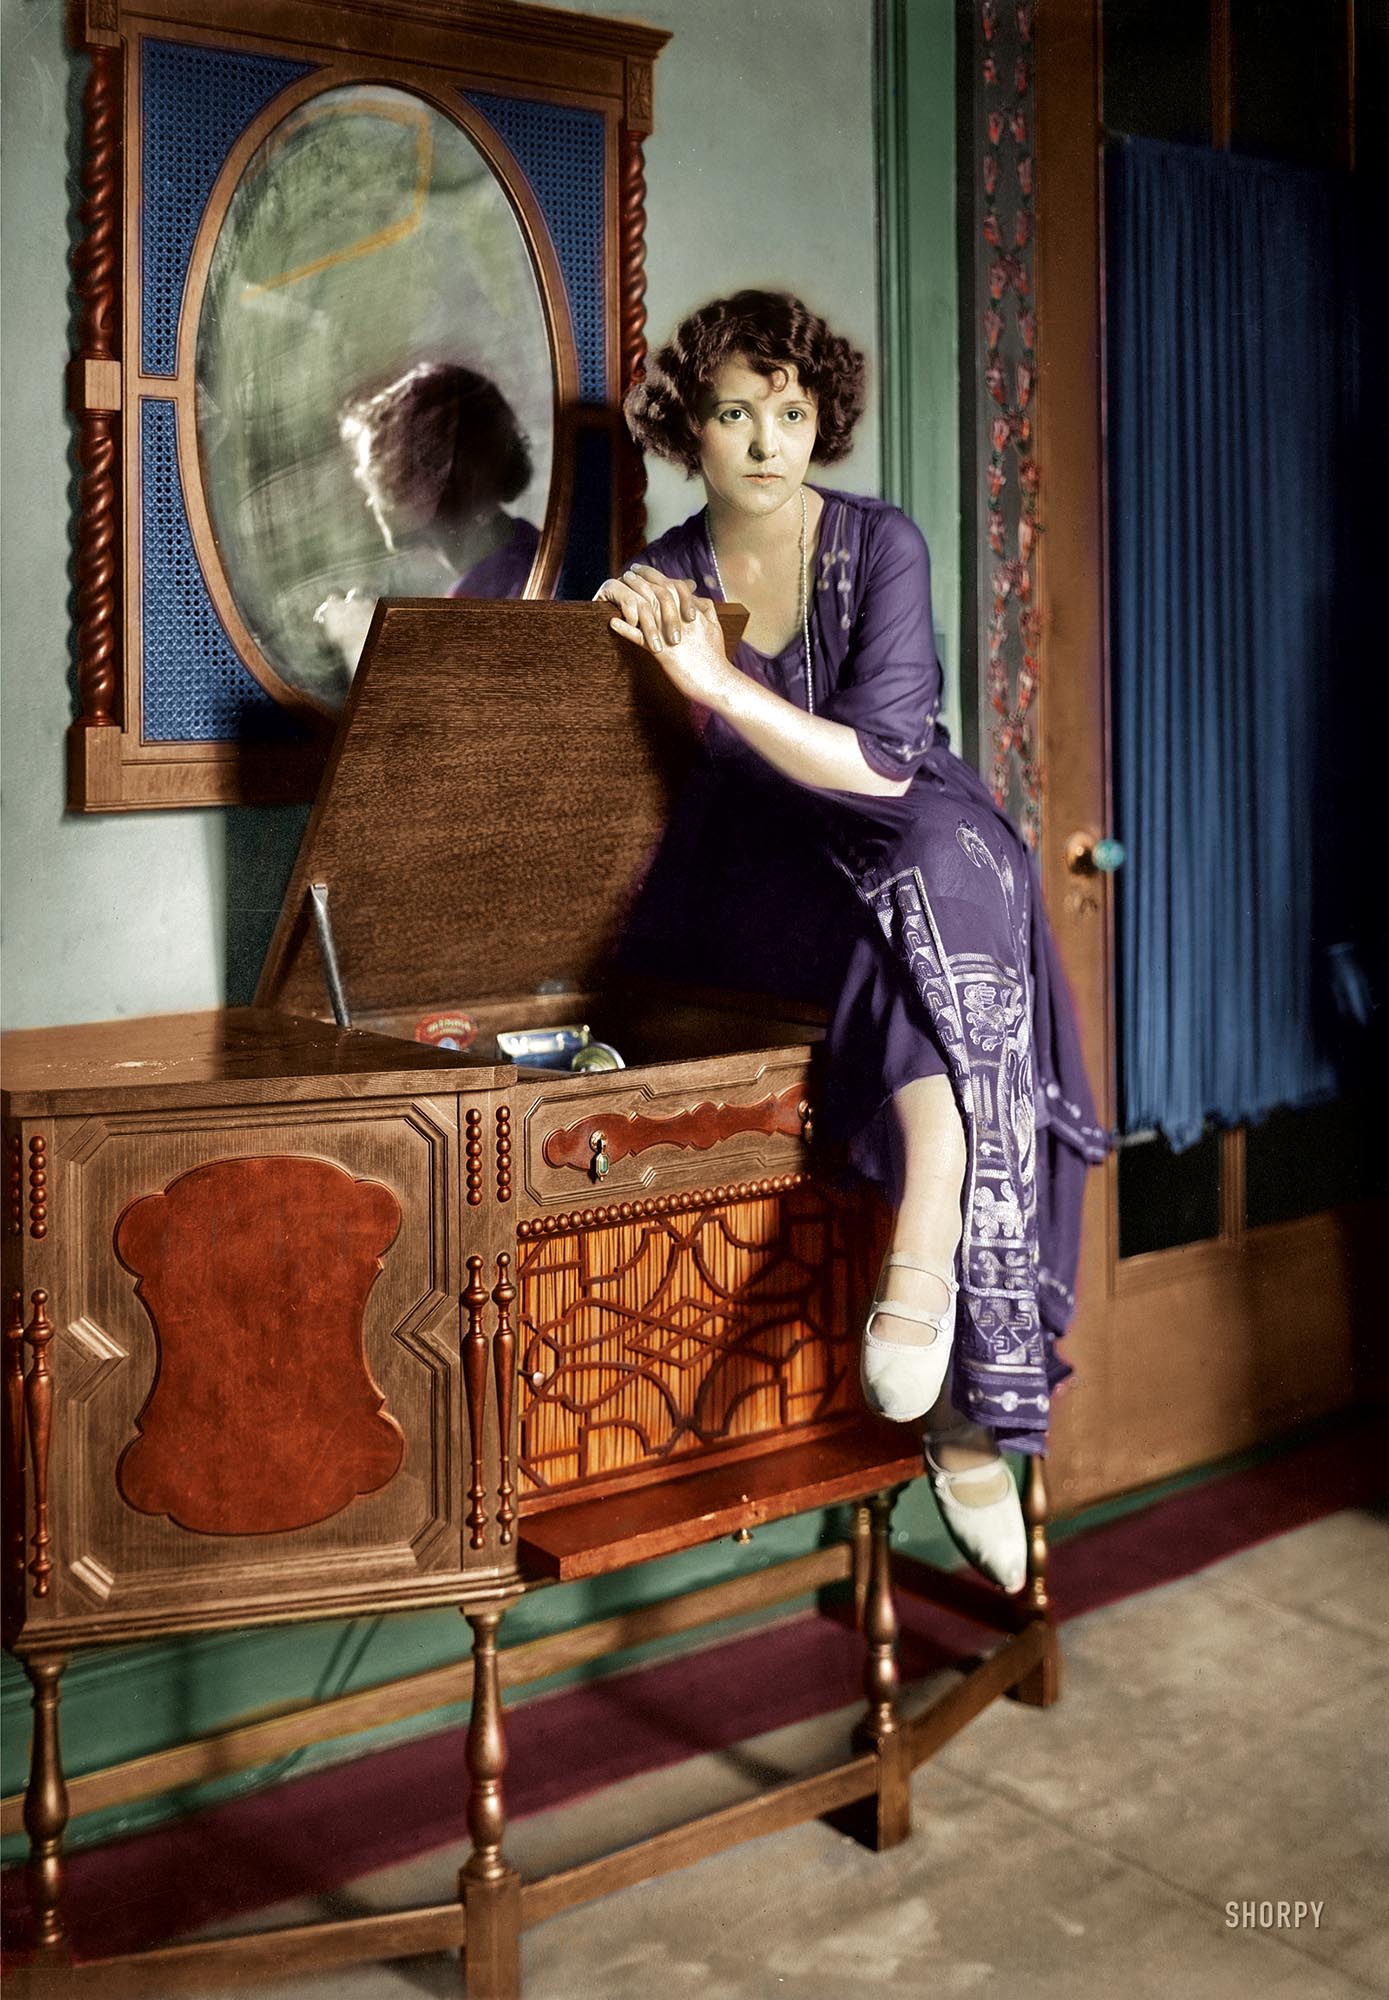 New York circa 1921. A lady and her phonograph. Colorized version of this Shorpy photo.